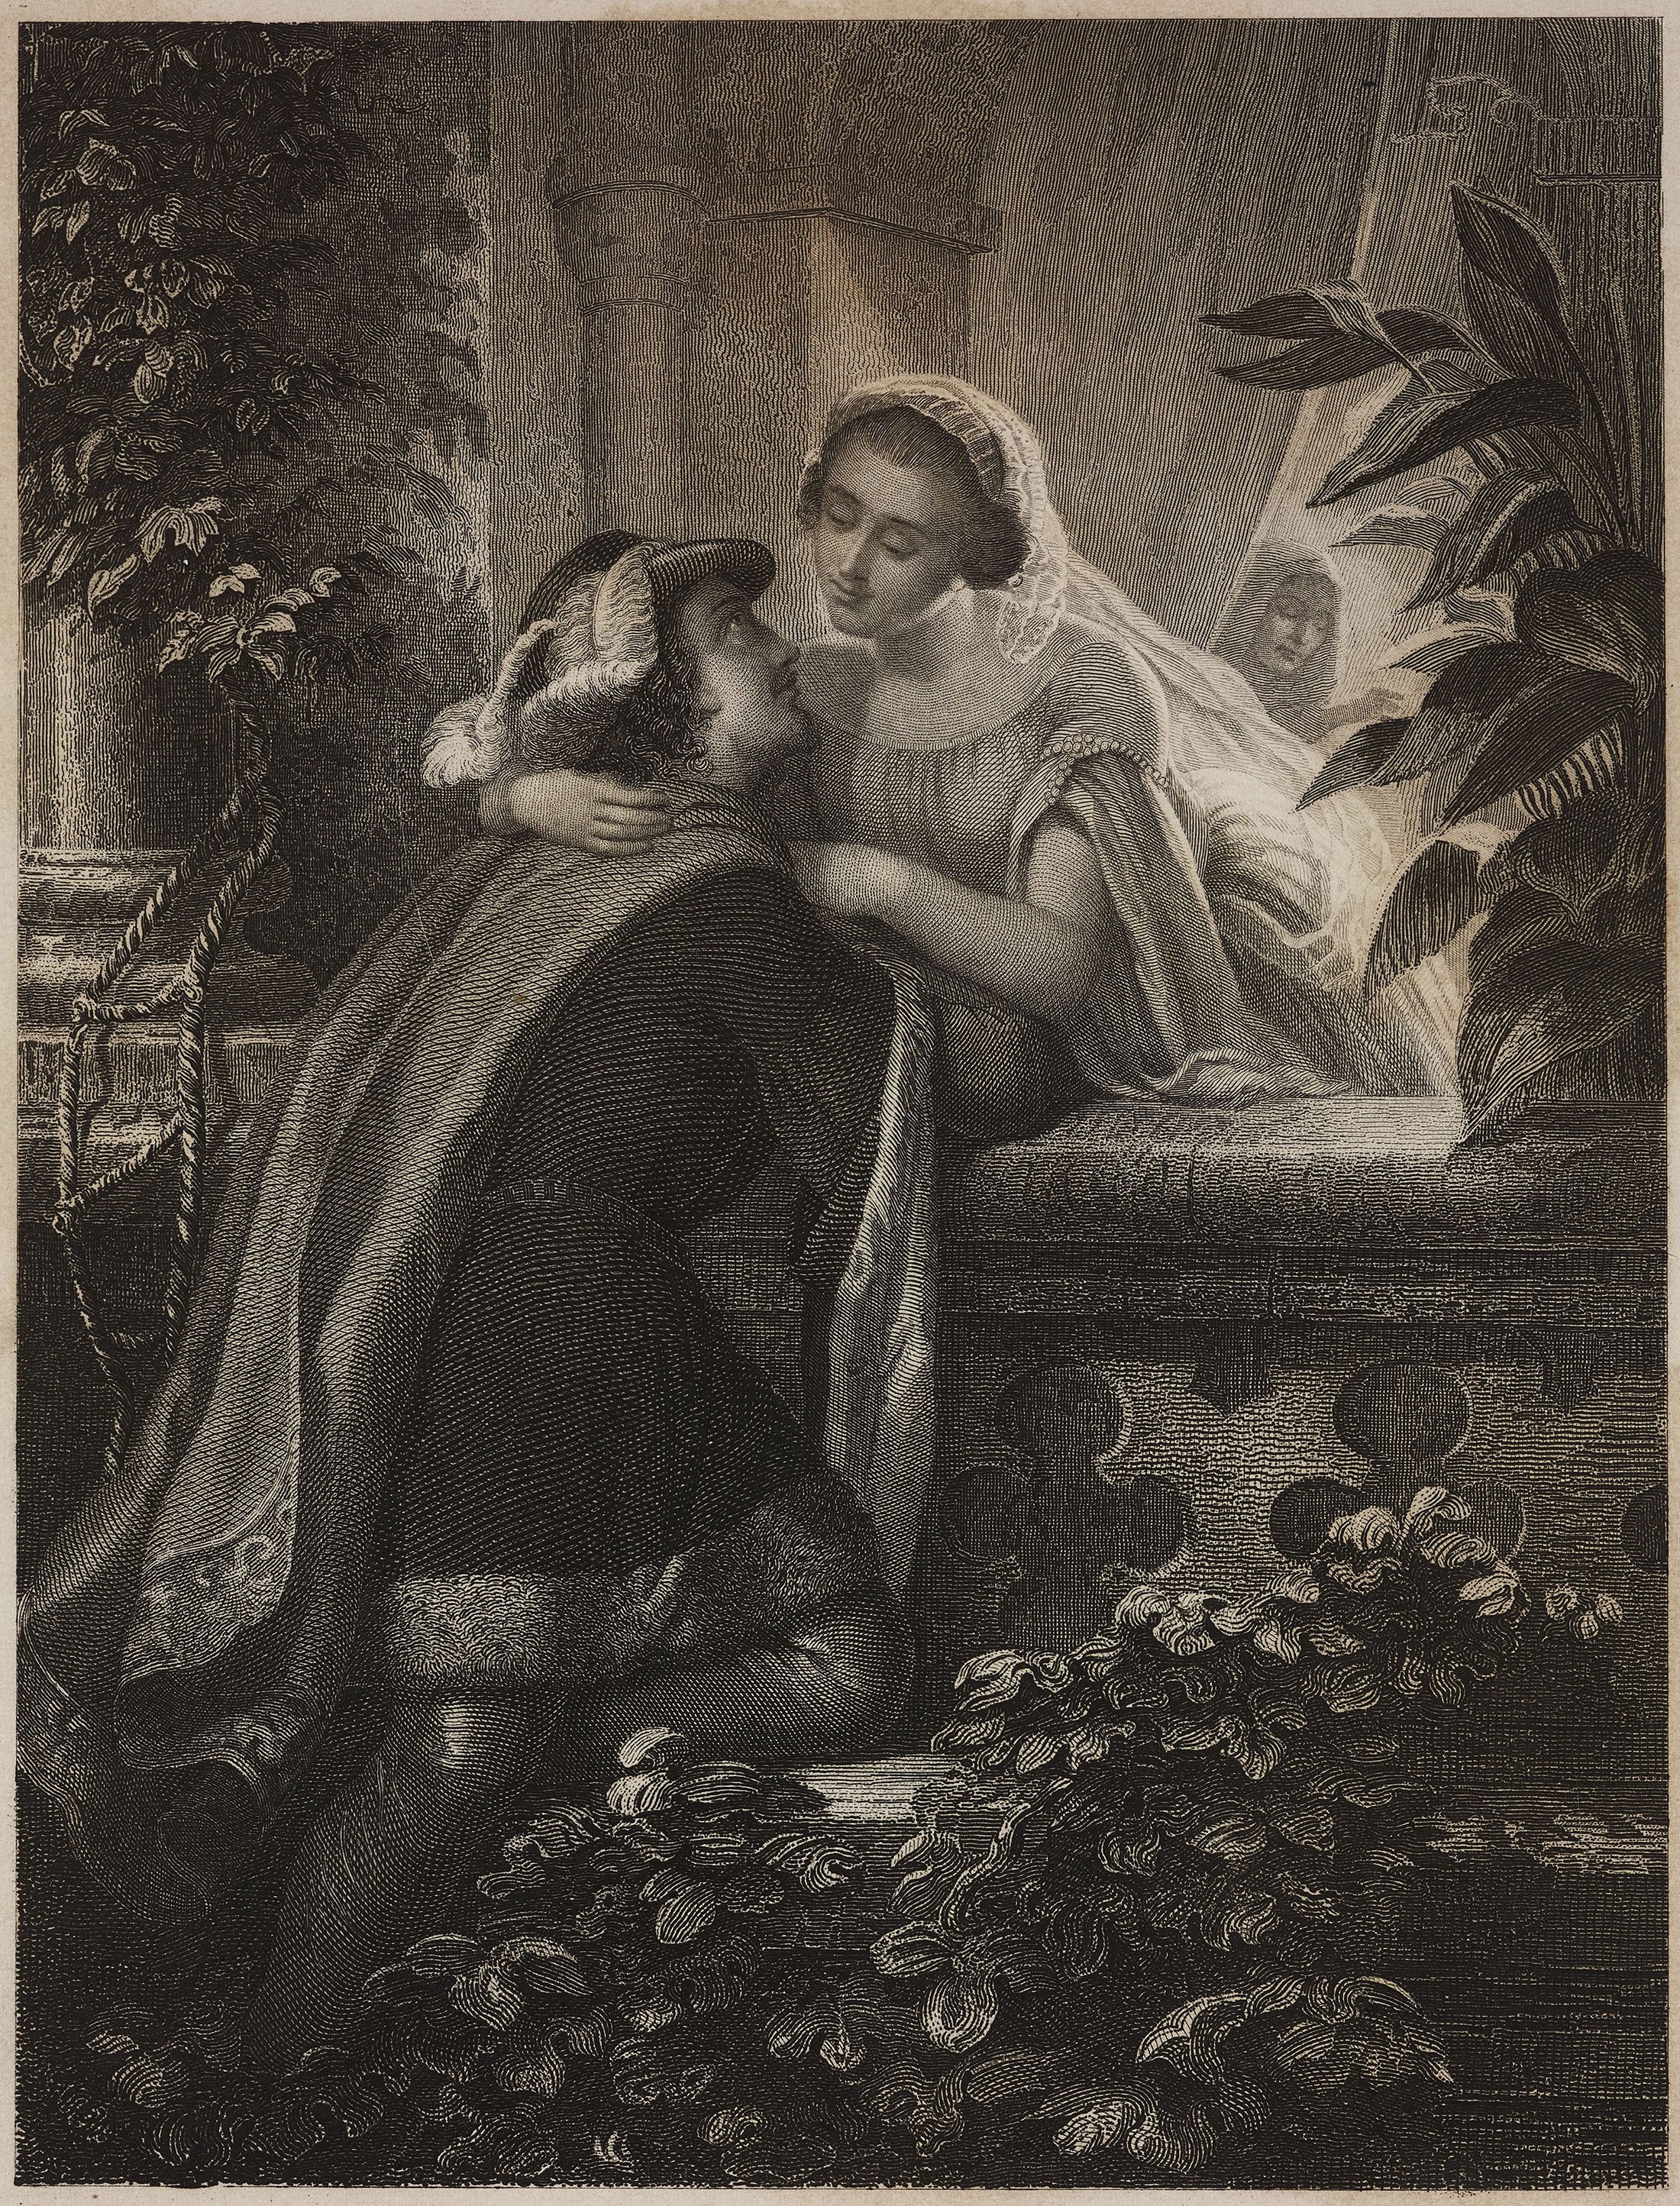 Romeo and Juliet, engraving from a painting by A Noack, from Letture di famiglia (Family Readings), Year V, 1856, Trieste. (Photo by Icas94 / De Agostini Picture Library via Getty Images)